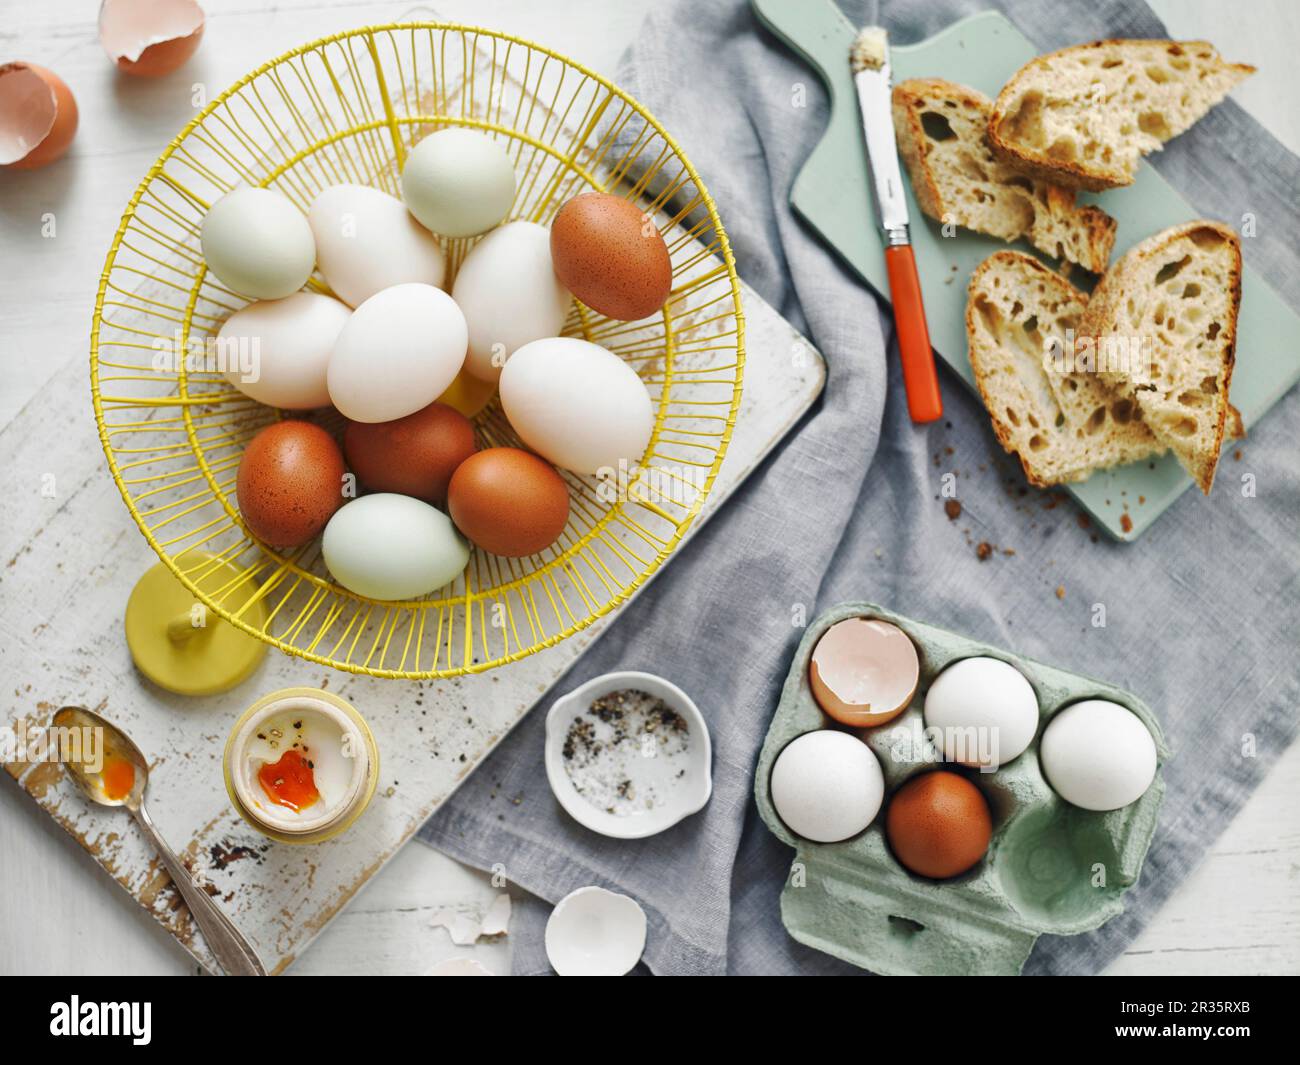 Brown and white eggs in a basket and in an egg box Stock Photo